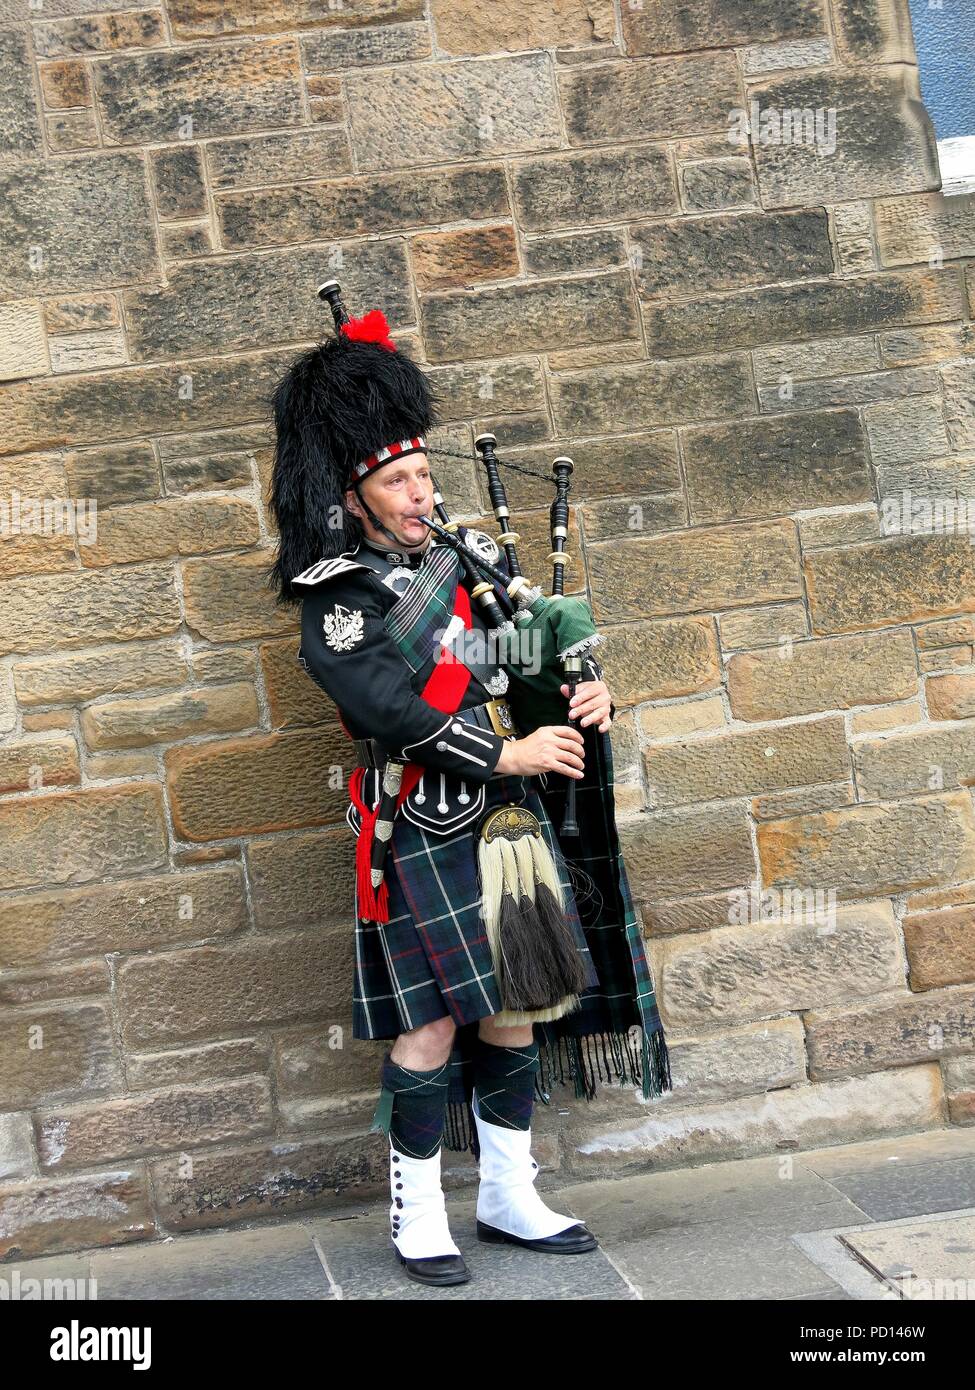 Bagpipe Uniform High Resolution Stock Photography and Images - Alamy